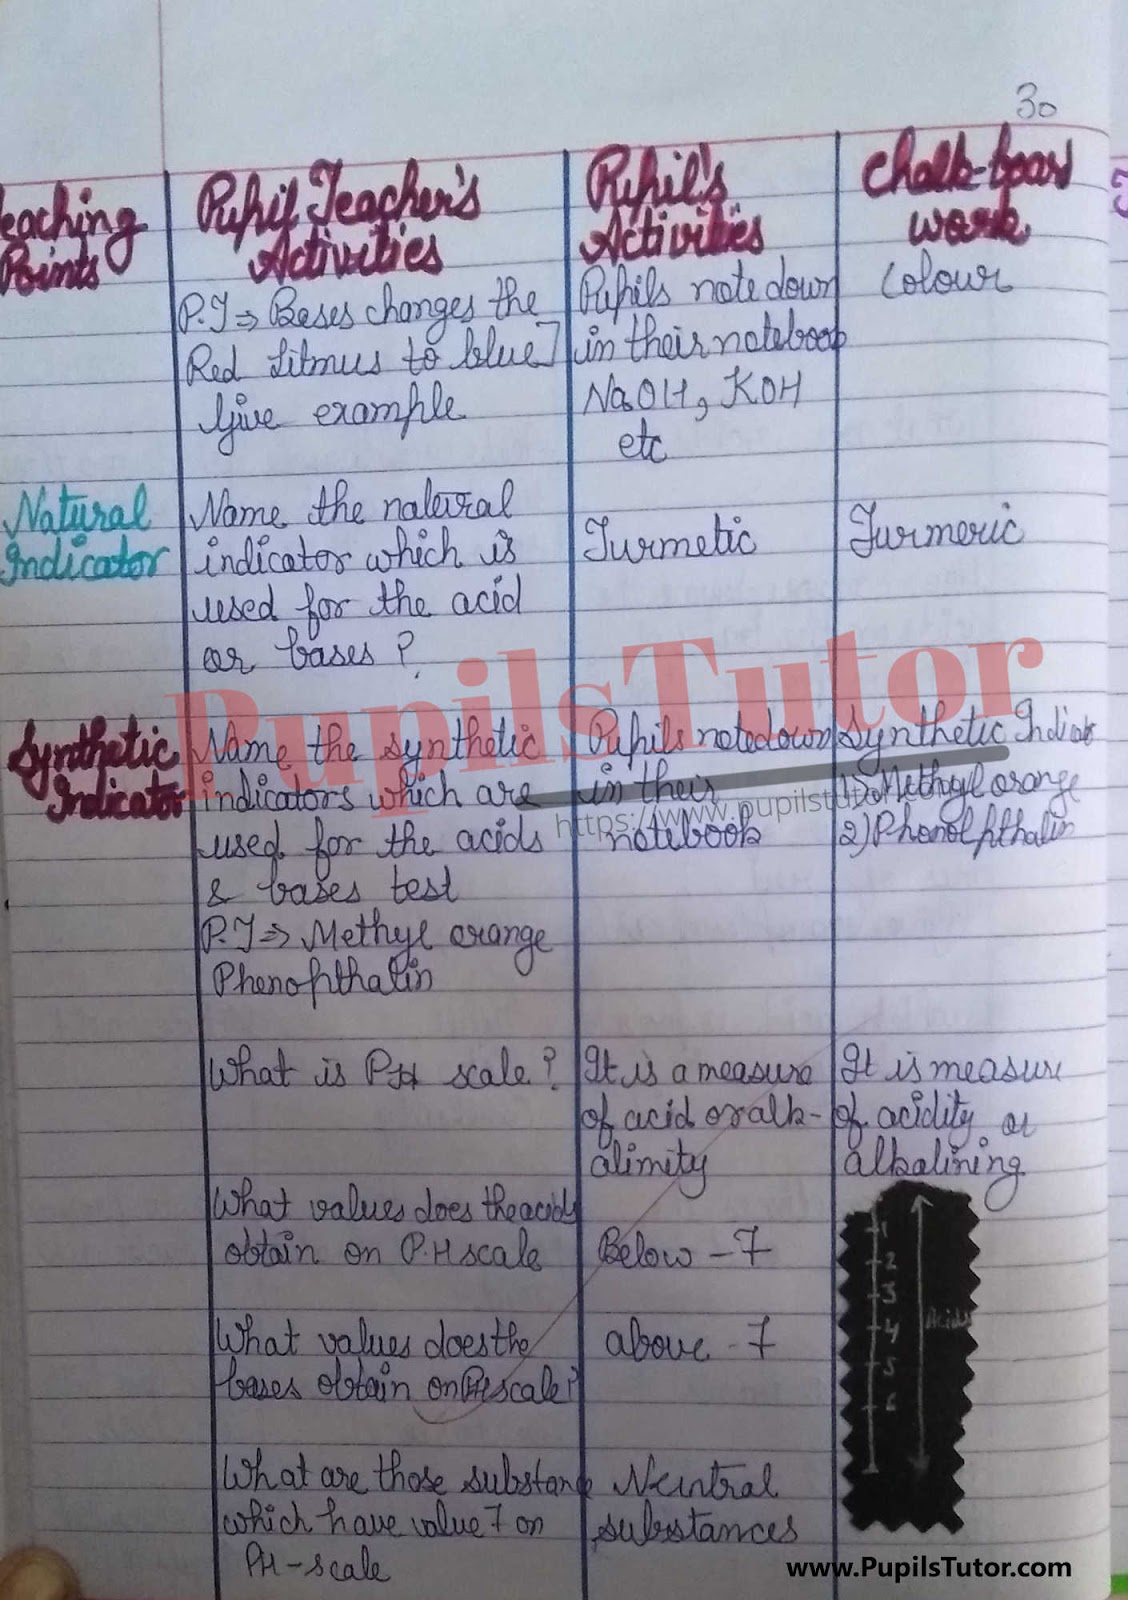 BED, DELED, BELED, BA B.Ed Integrated, B.Com B.Ed, BSC BEd, BTC, BSTC, M.ED, DED And NIOS Teaching Of Chemistry Class 4th 5th 6th 7th 8th 9th, 10th, 11th, 12th Digital Lesson Plan Format On Acid Base Reaction Topic – [Page And Pic Number 5] – https://www.pupilstutor.com/